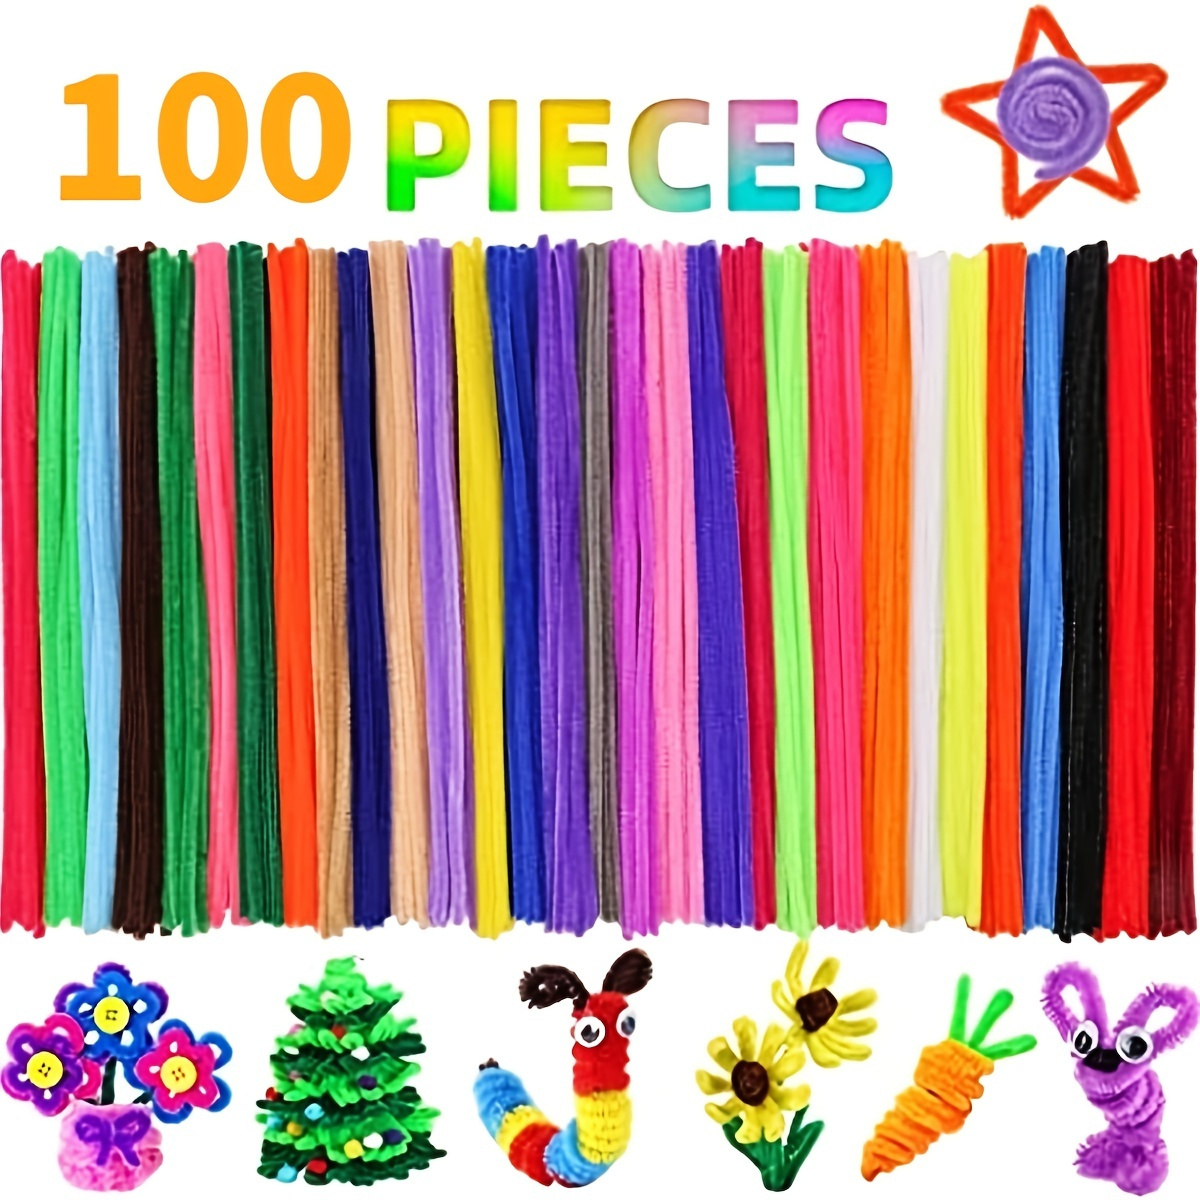 

Pipe Cleaners Craft Chenille Stems, 100 Pieces 10 Assorted Colors For Crafting Diy Arts Projects Decorations, 6mm X 12inch Fuzzy Colored Chenille Stem Sticks Set Craft Supplies For Adults Easter Gift